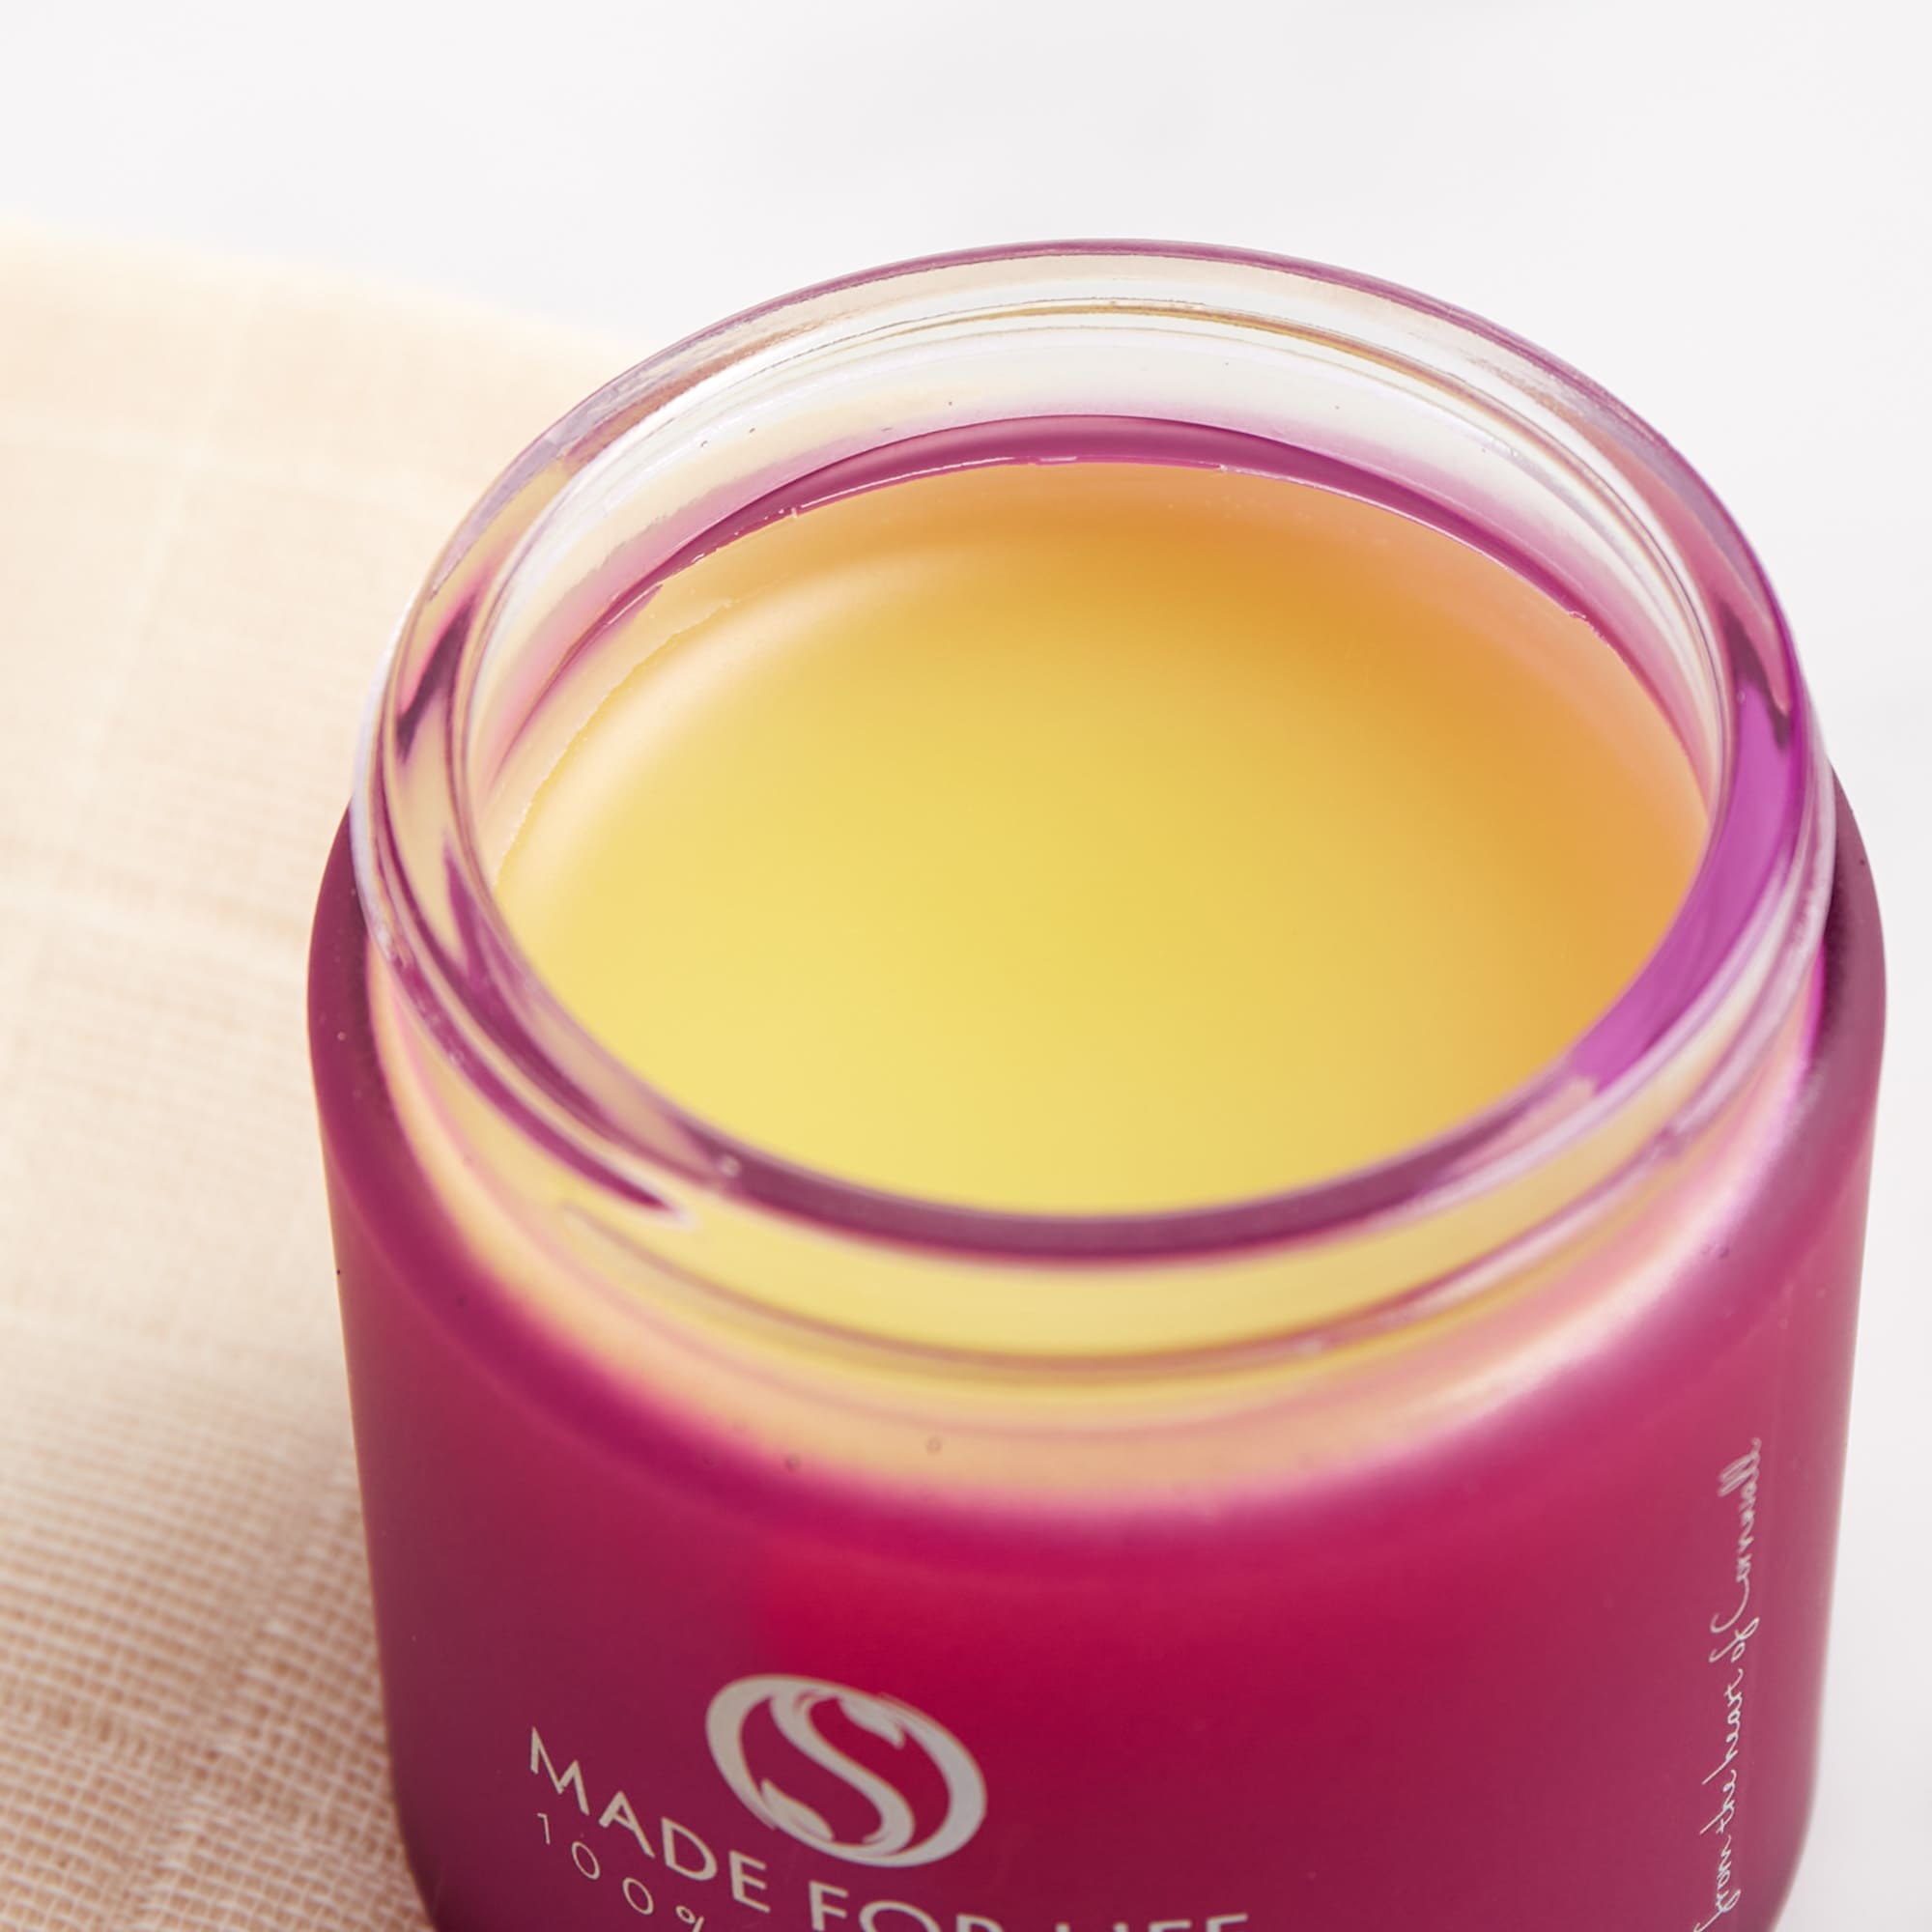 Daily Radiance Facial Cleansing Balm 100ml